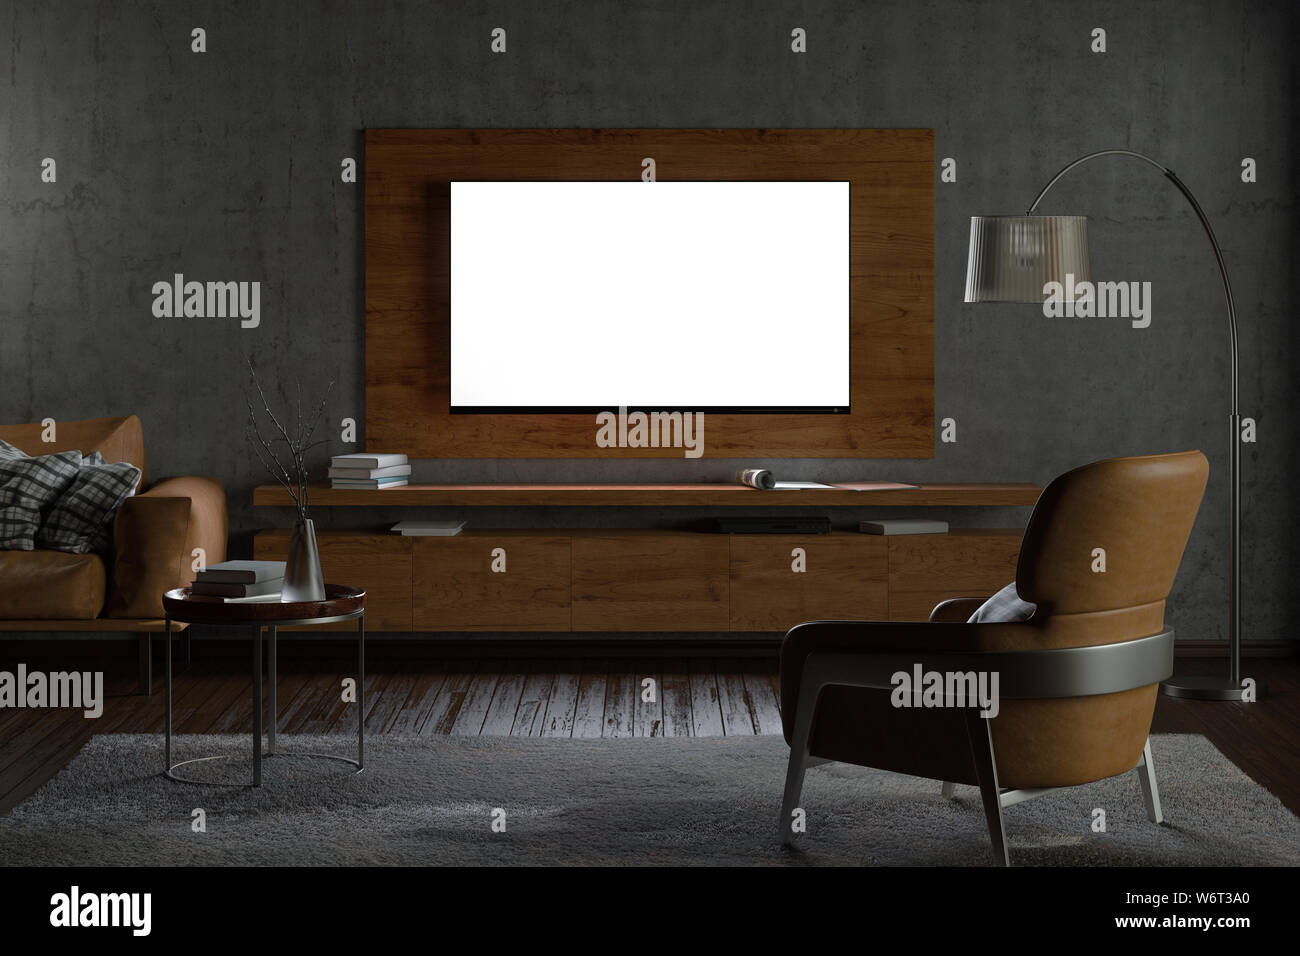 Glowing TV screen at night on the concrete wall of modern living room with cabinet,brown leather armchairand couch, coffee table, floor lamp and fur c Stock Photo